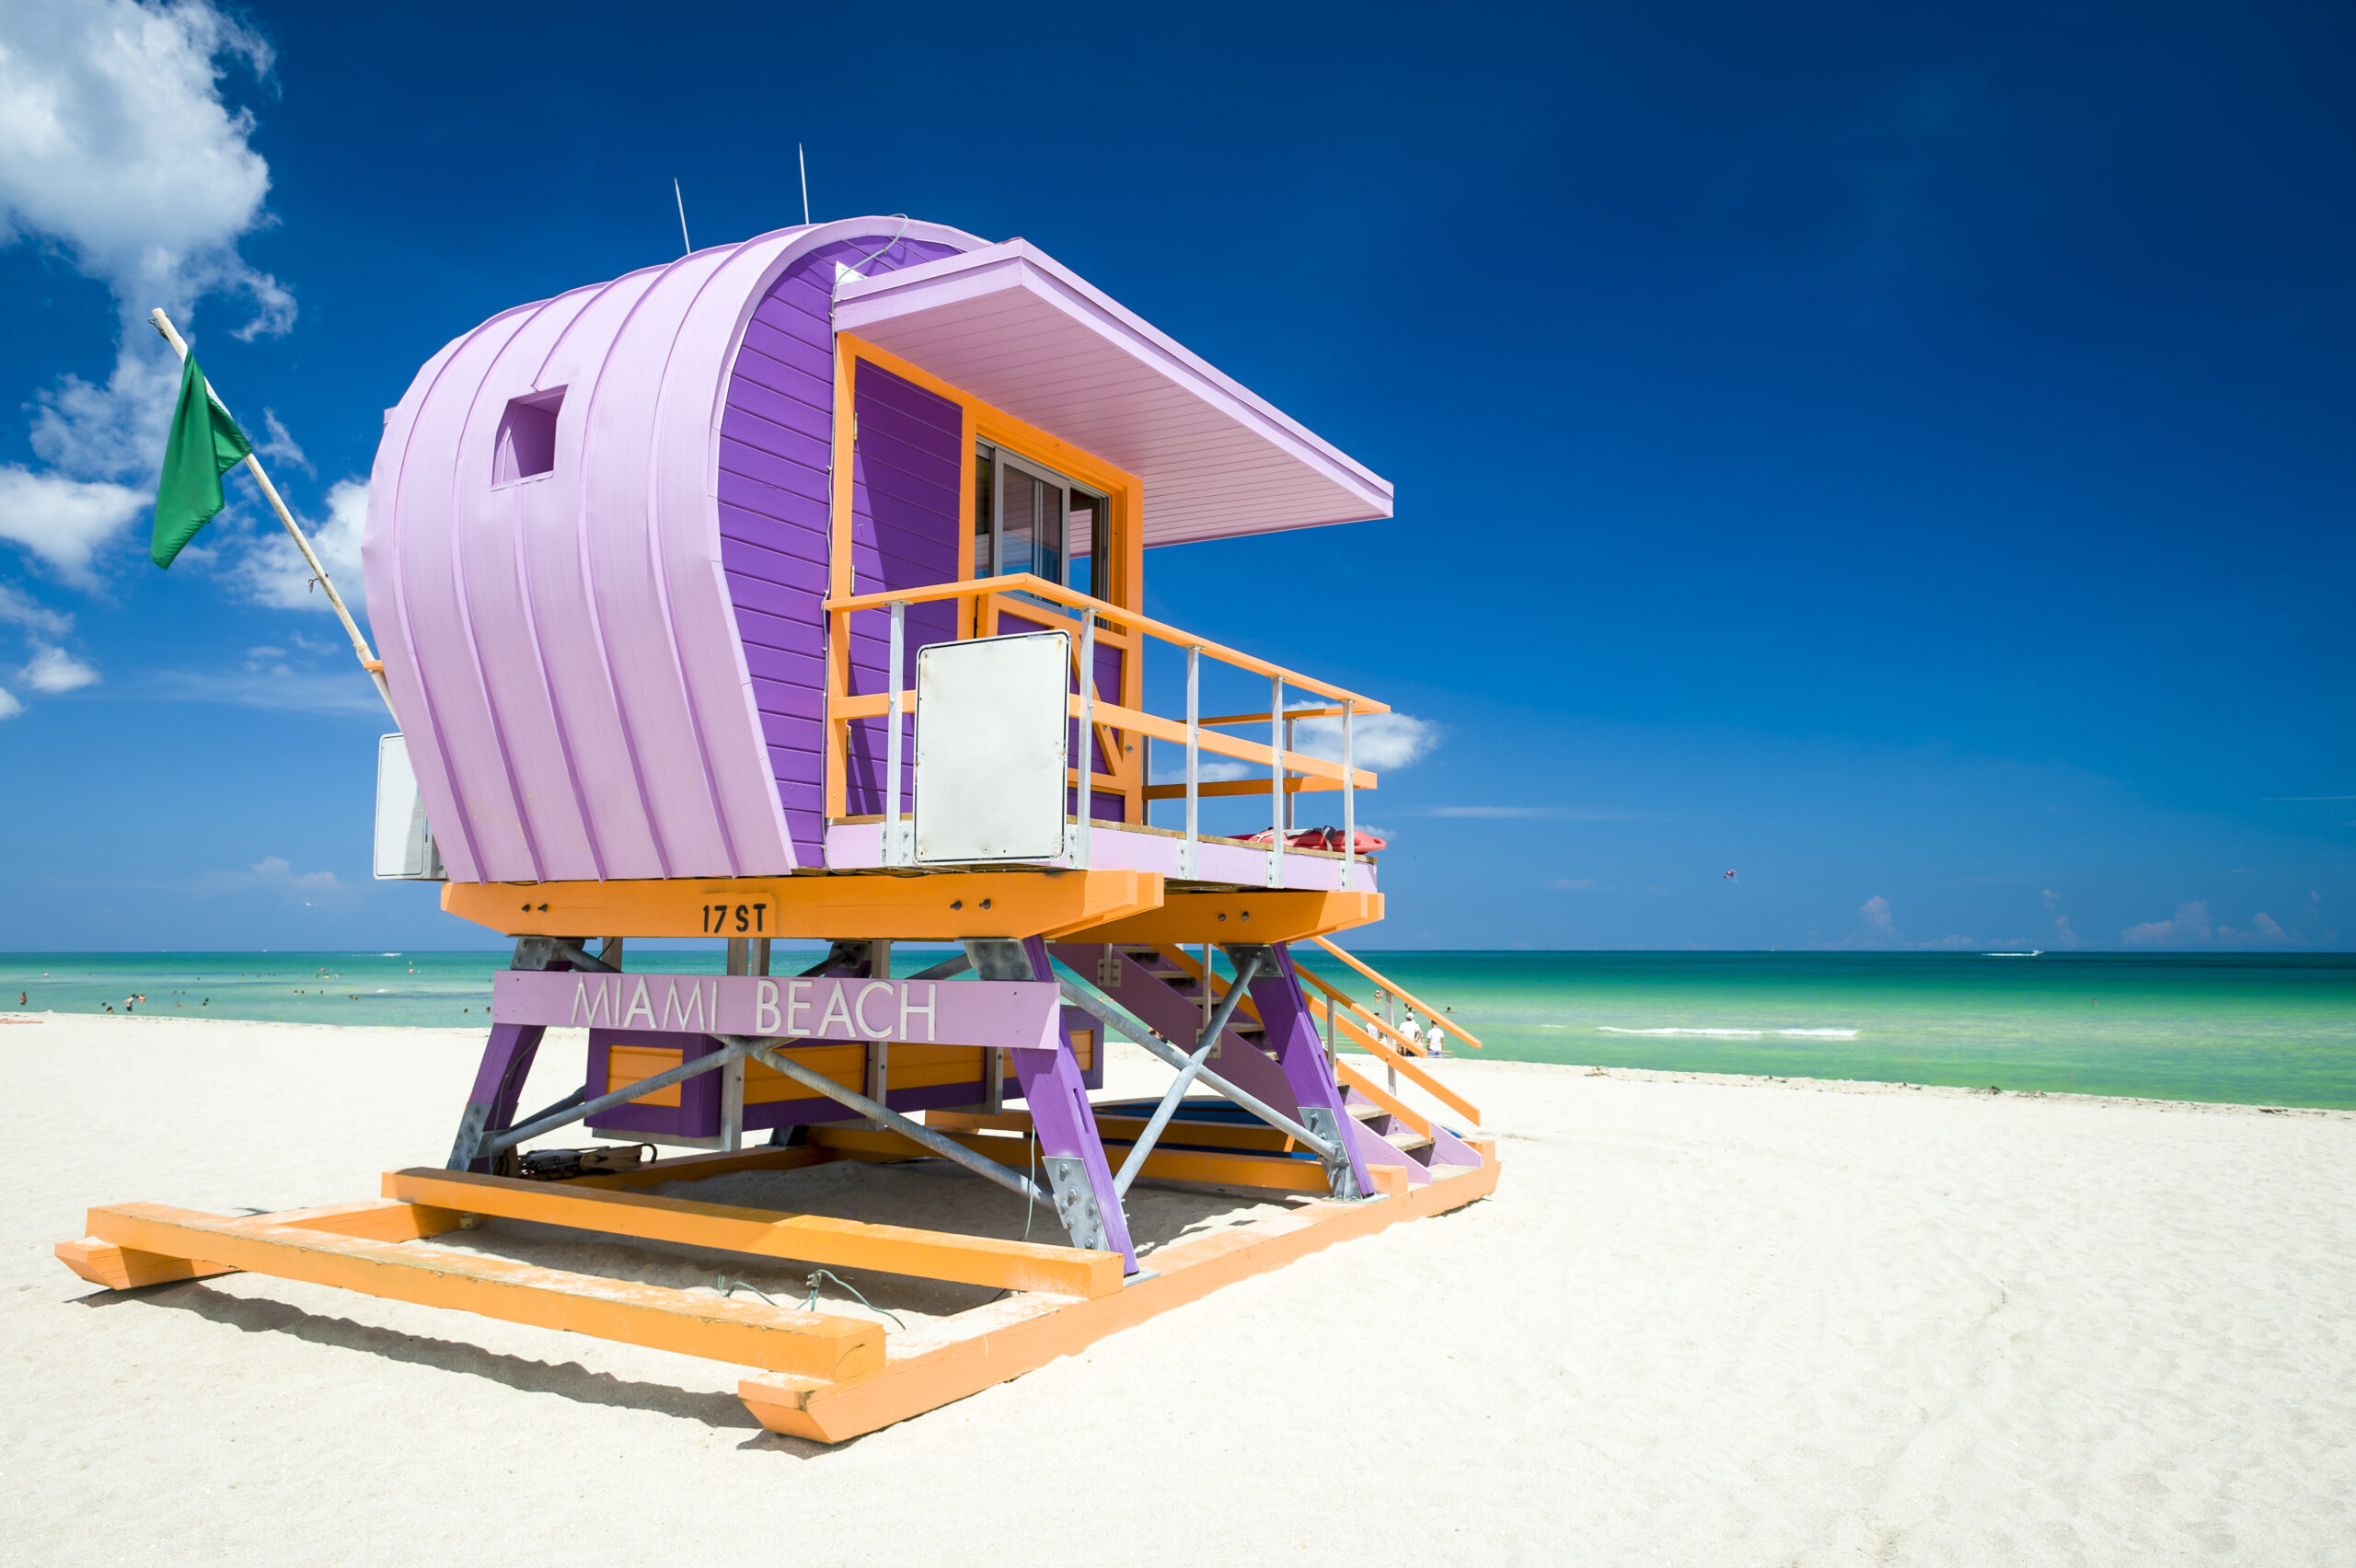 COMPREHENSIVE TRAVEL GUIDE TO THE BEST BEACHES IN MIAMI